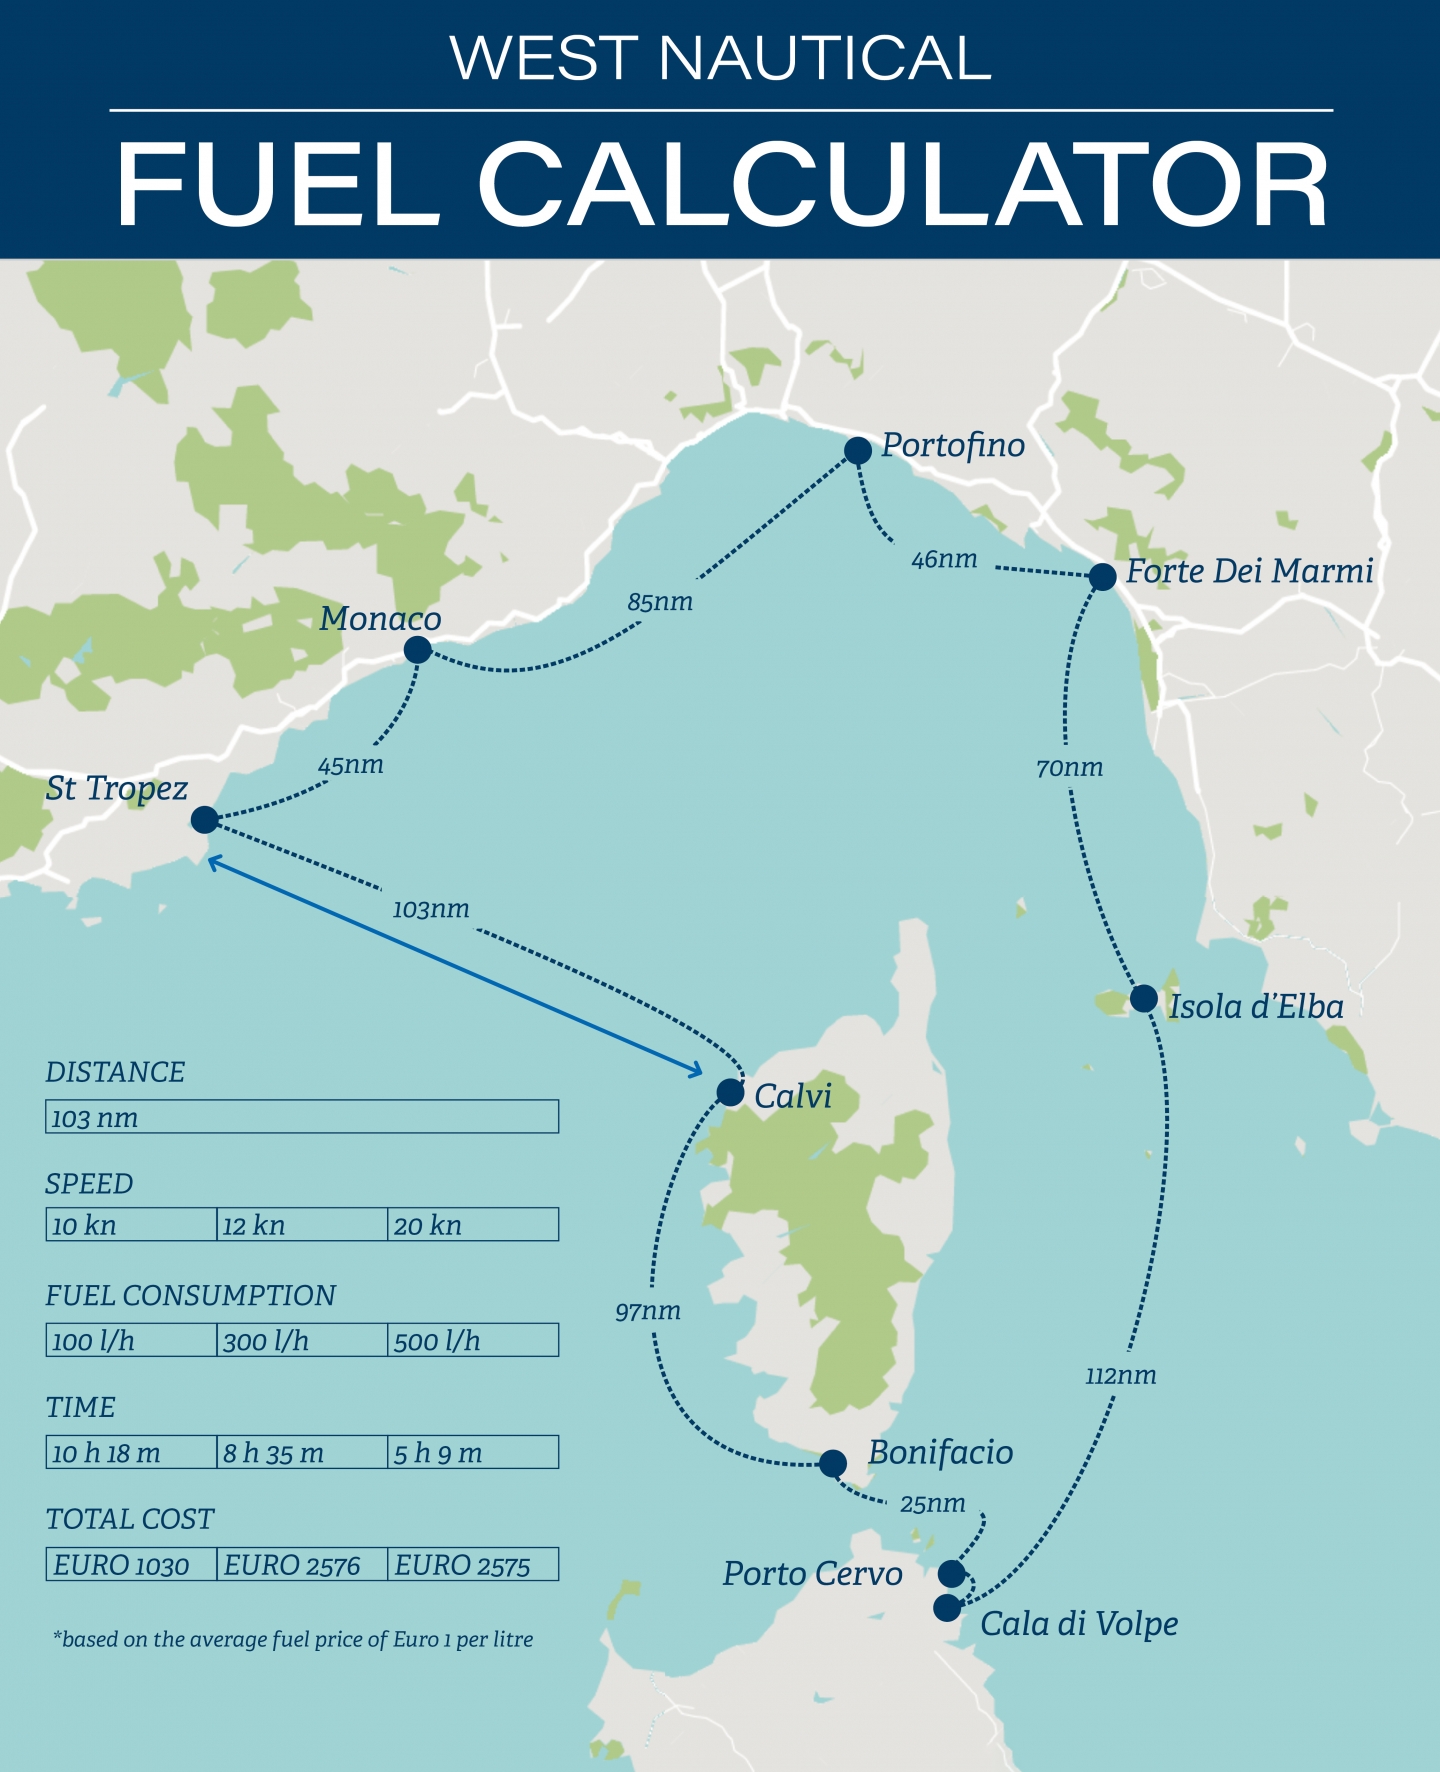 Welcome to the New West Nautical Fuel Calculator